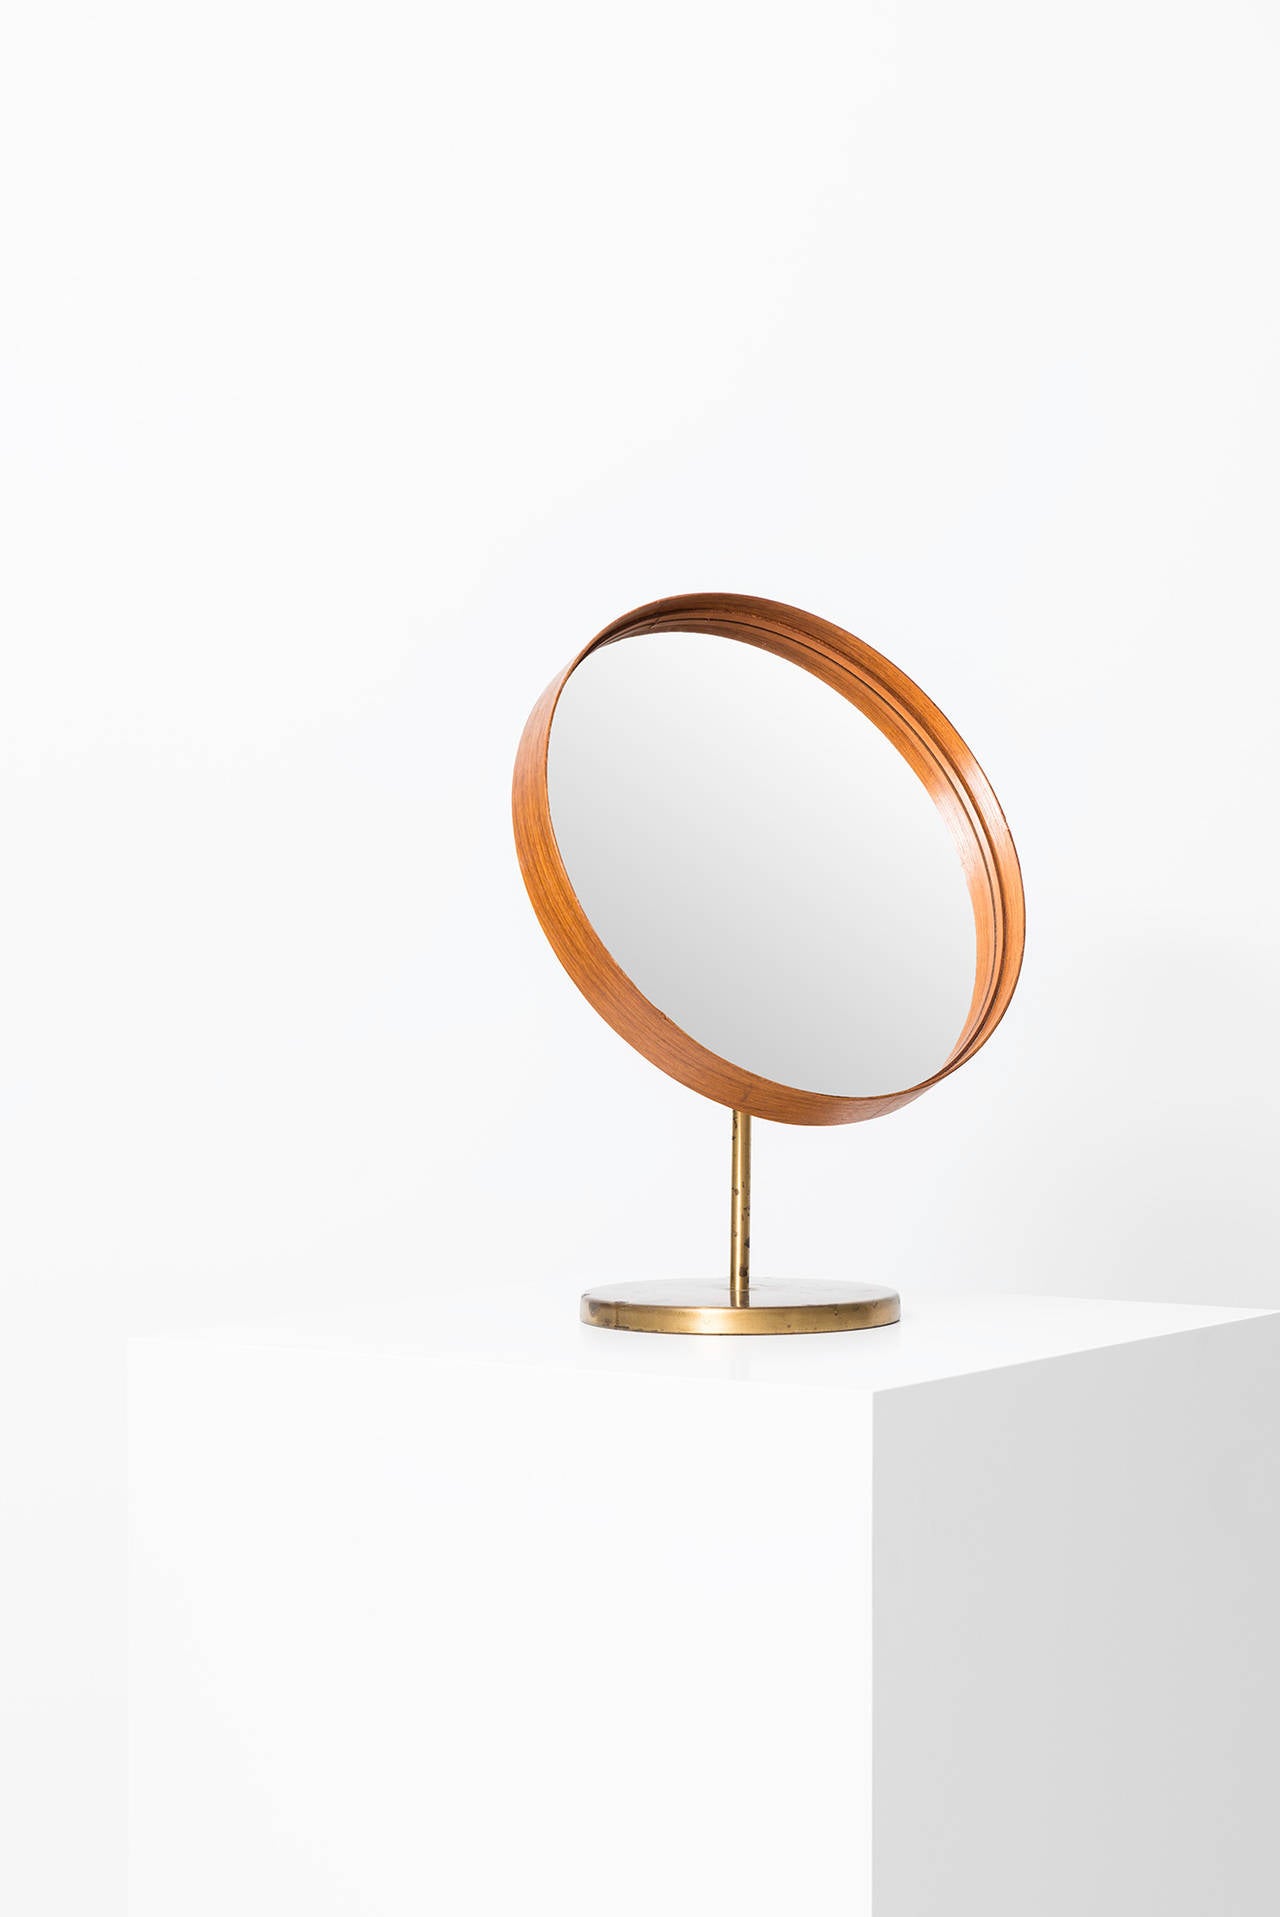 Rare table mirror in teak and brass produced by Glasmäster in Markaryd, Sweden.